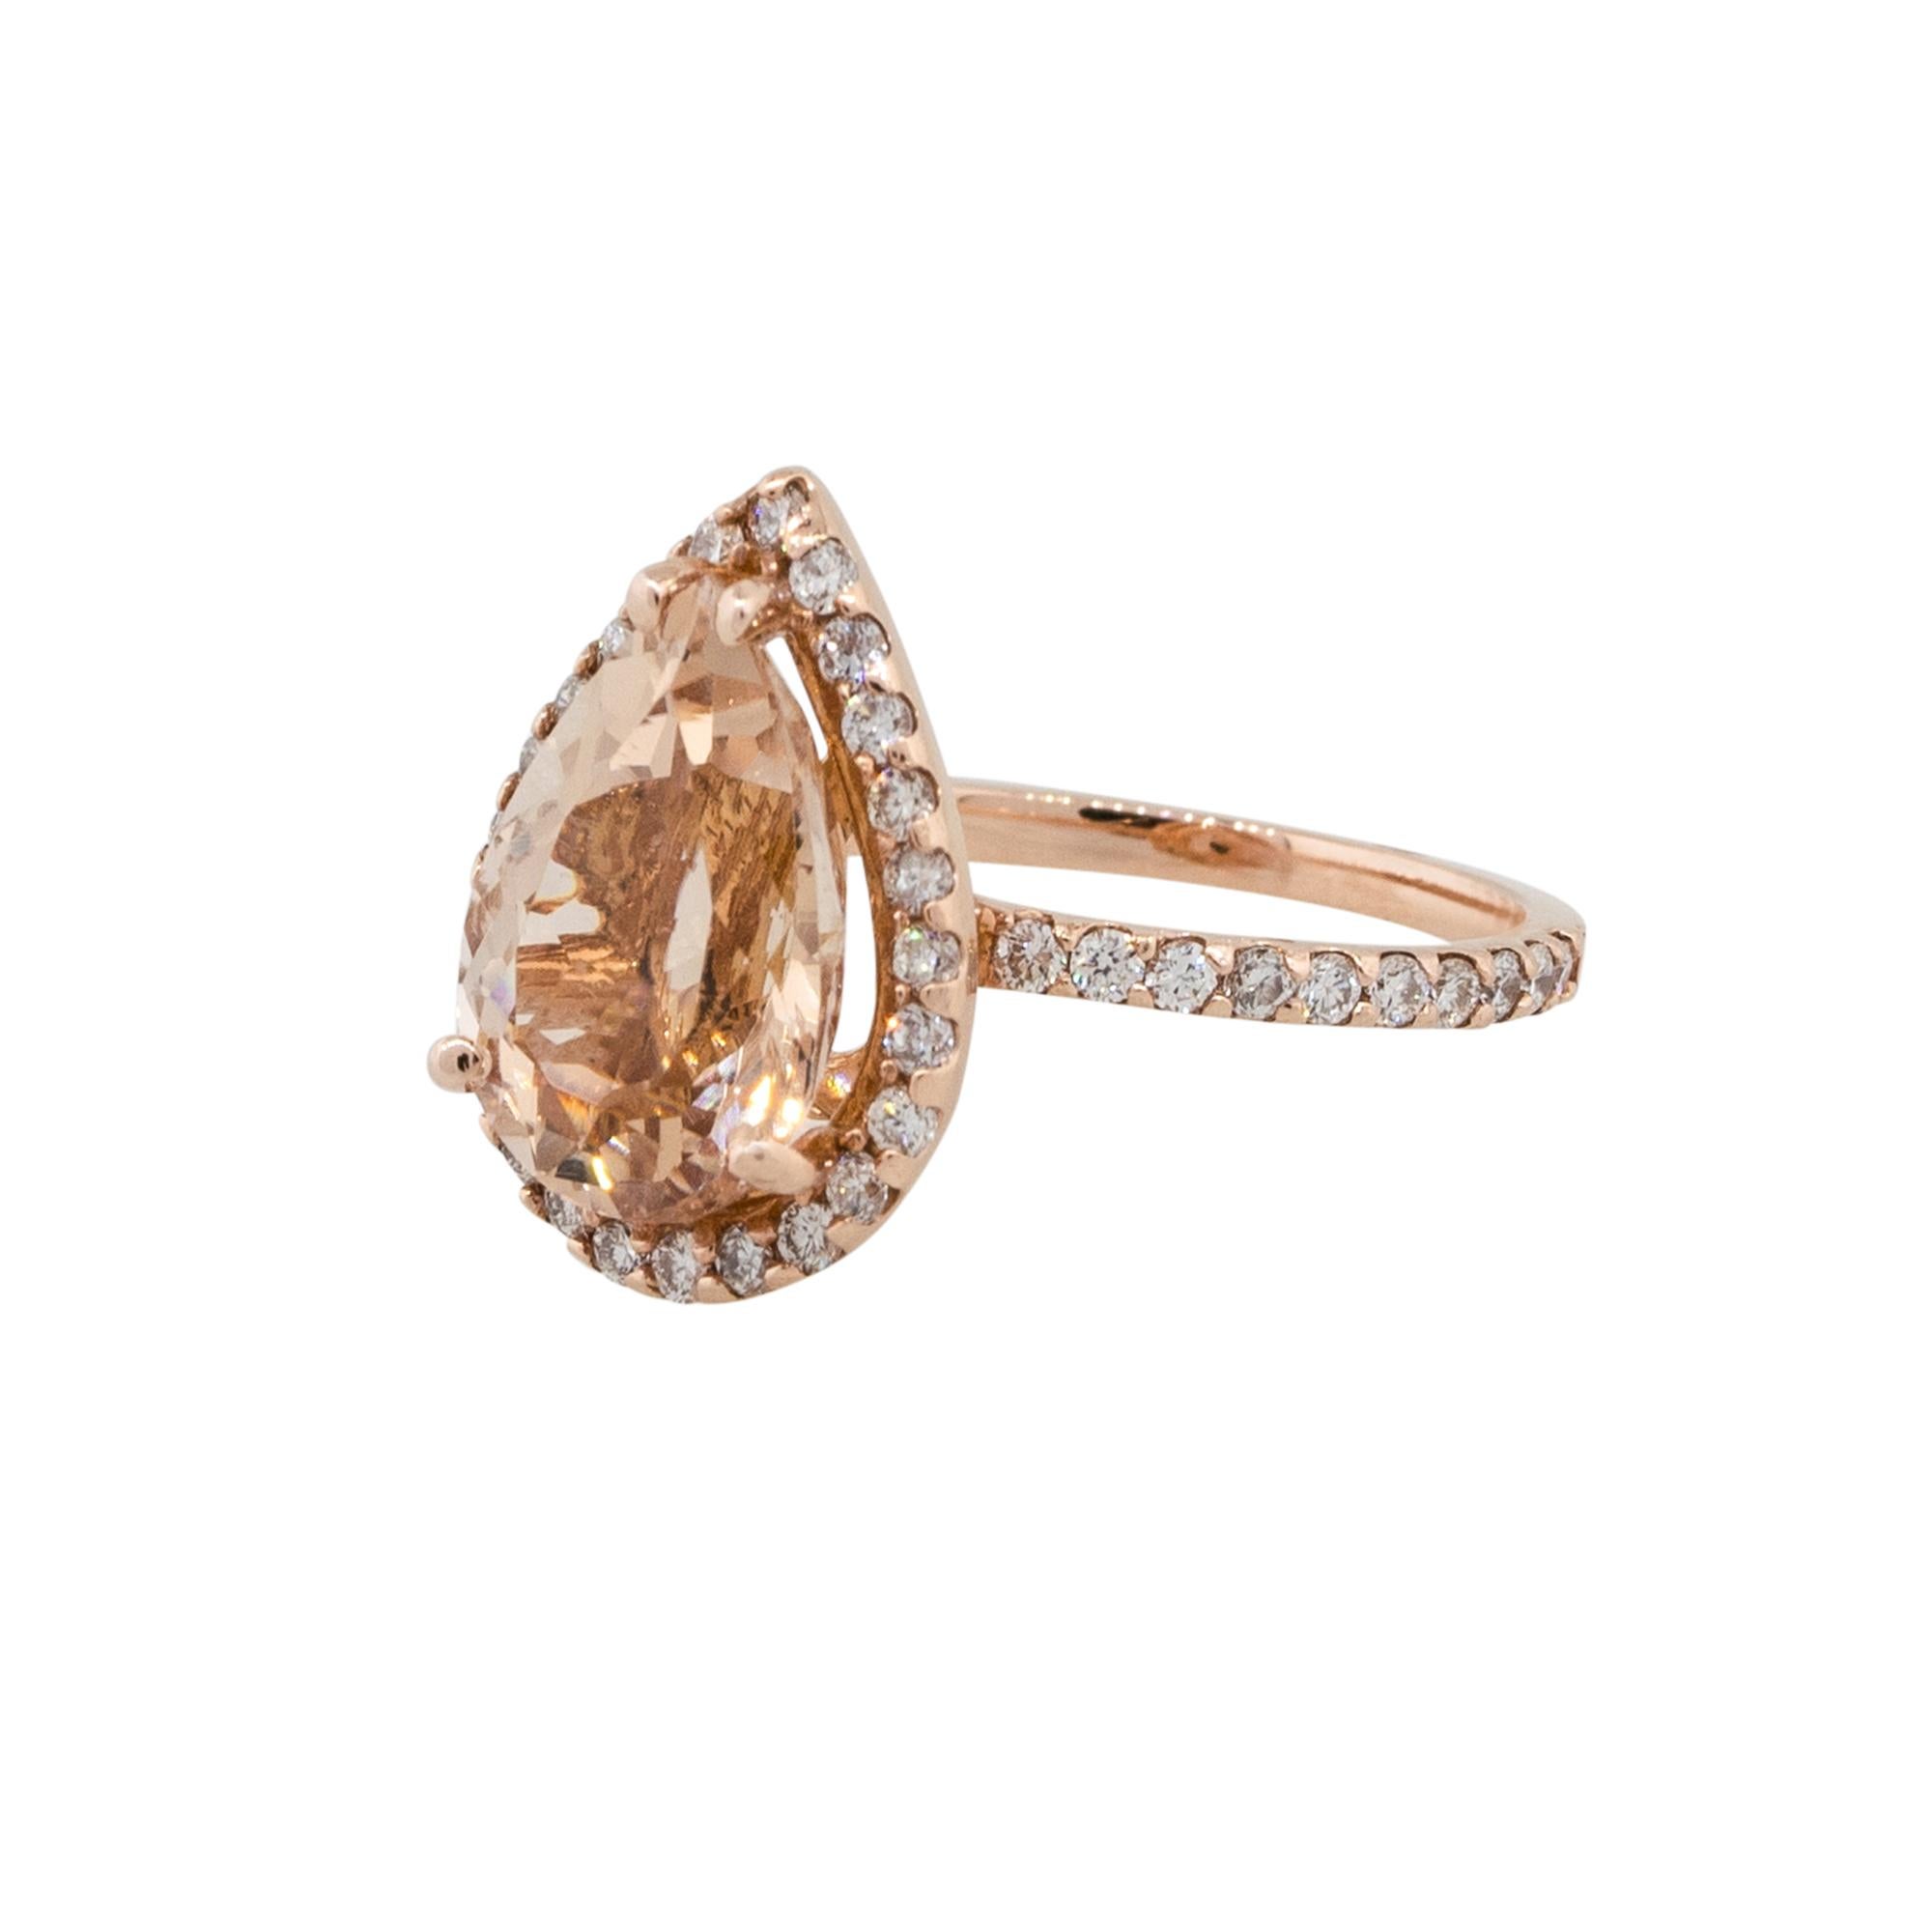 Material: 14k Rose Gold
Diamond Details: Approx. 0.80ctw of round cut Diamonds. Diamonds are H in color and VS in clarity
Gemstone Details: Approx. 4.86ctw pear shape Morganite gemstone
Size: 7
Total weight: 4.6g (2.9dwt)
Measurements: 0.75